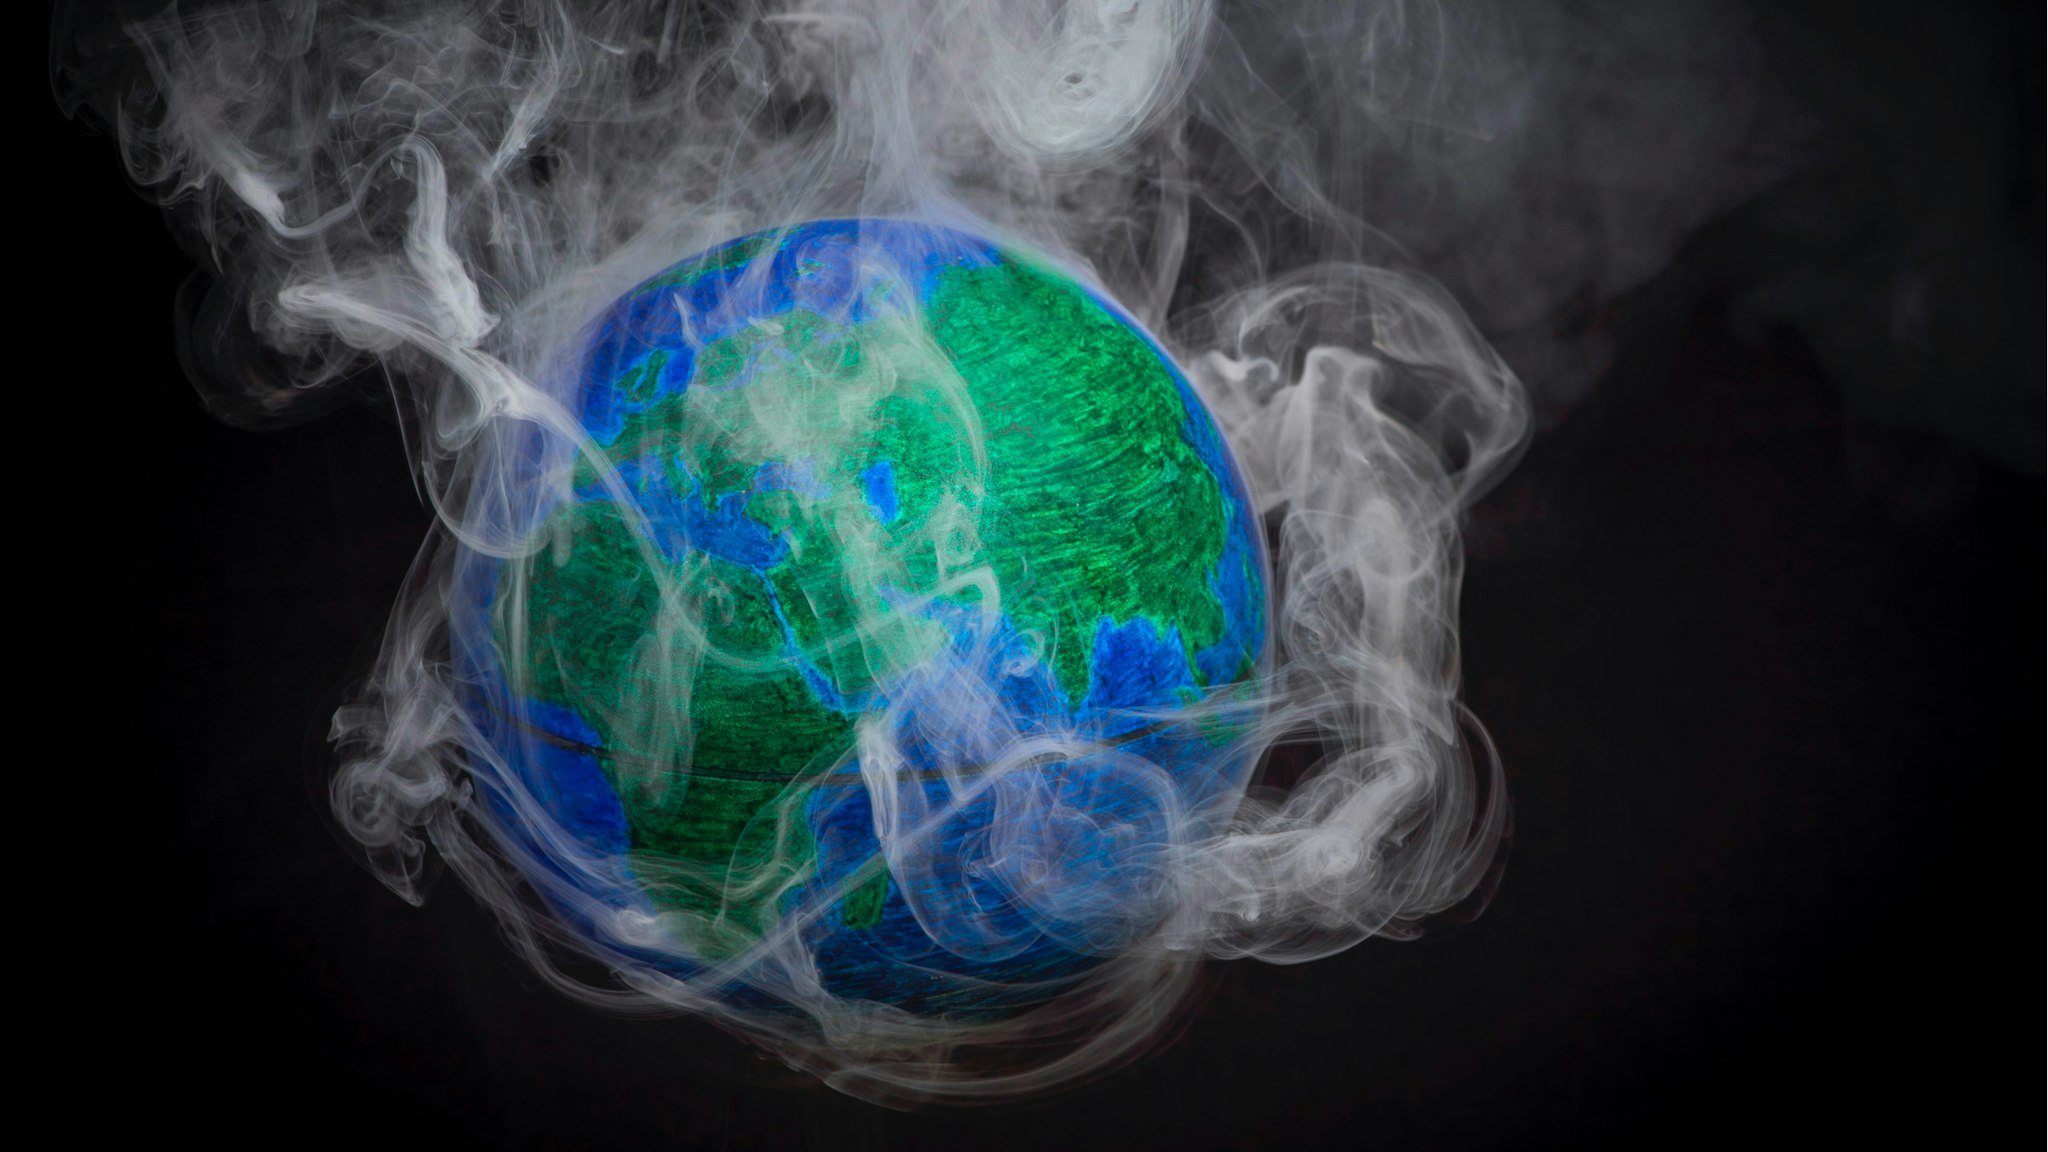 A picture taken on November 10, 2015 shows a small globe surrounded by smoke to illustrate global warming. France will be hosting and presiding the 21st Session of the Conference of the Parties to the United Nations Framework Convention on Climate Change (COP21/CMP11), also known as Paris 2015 from November 30 to December 11.